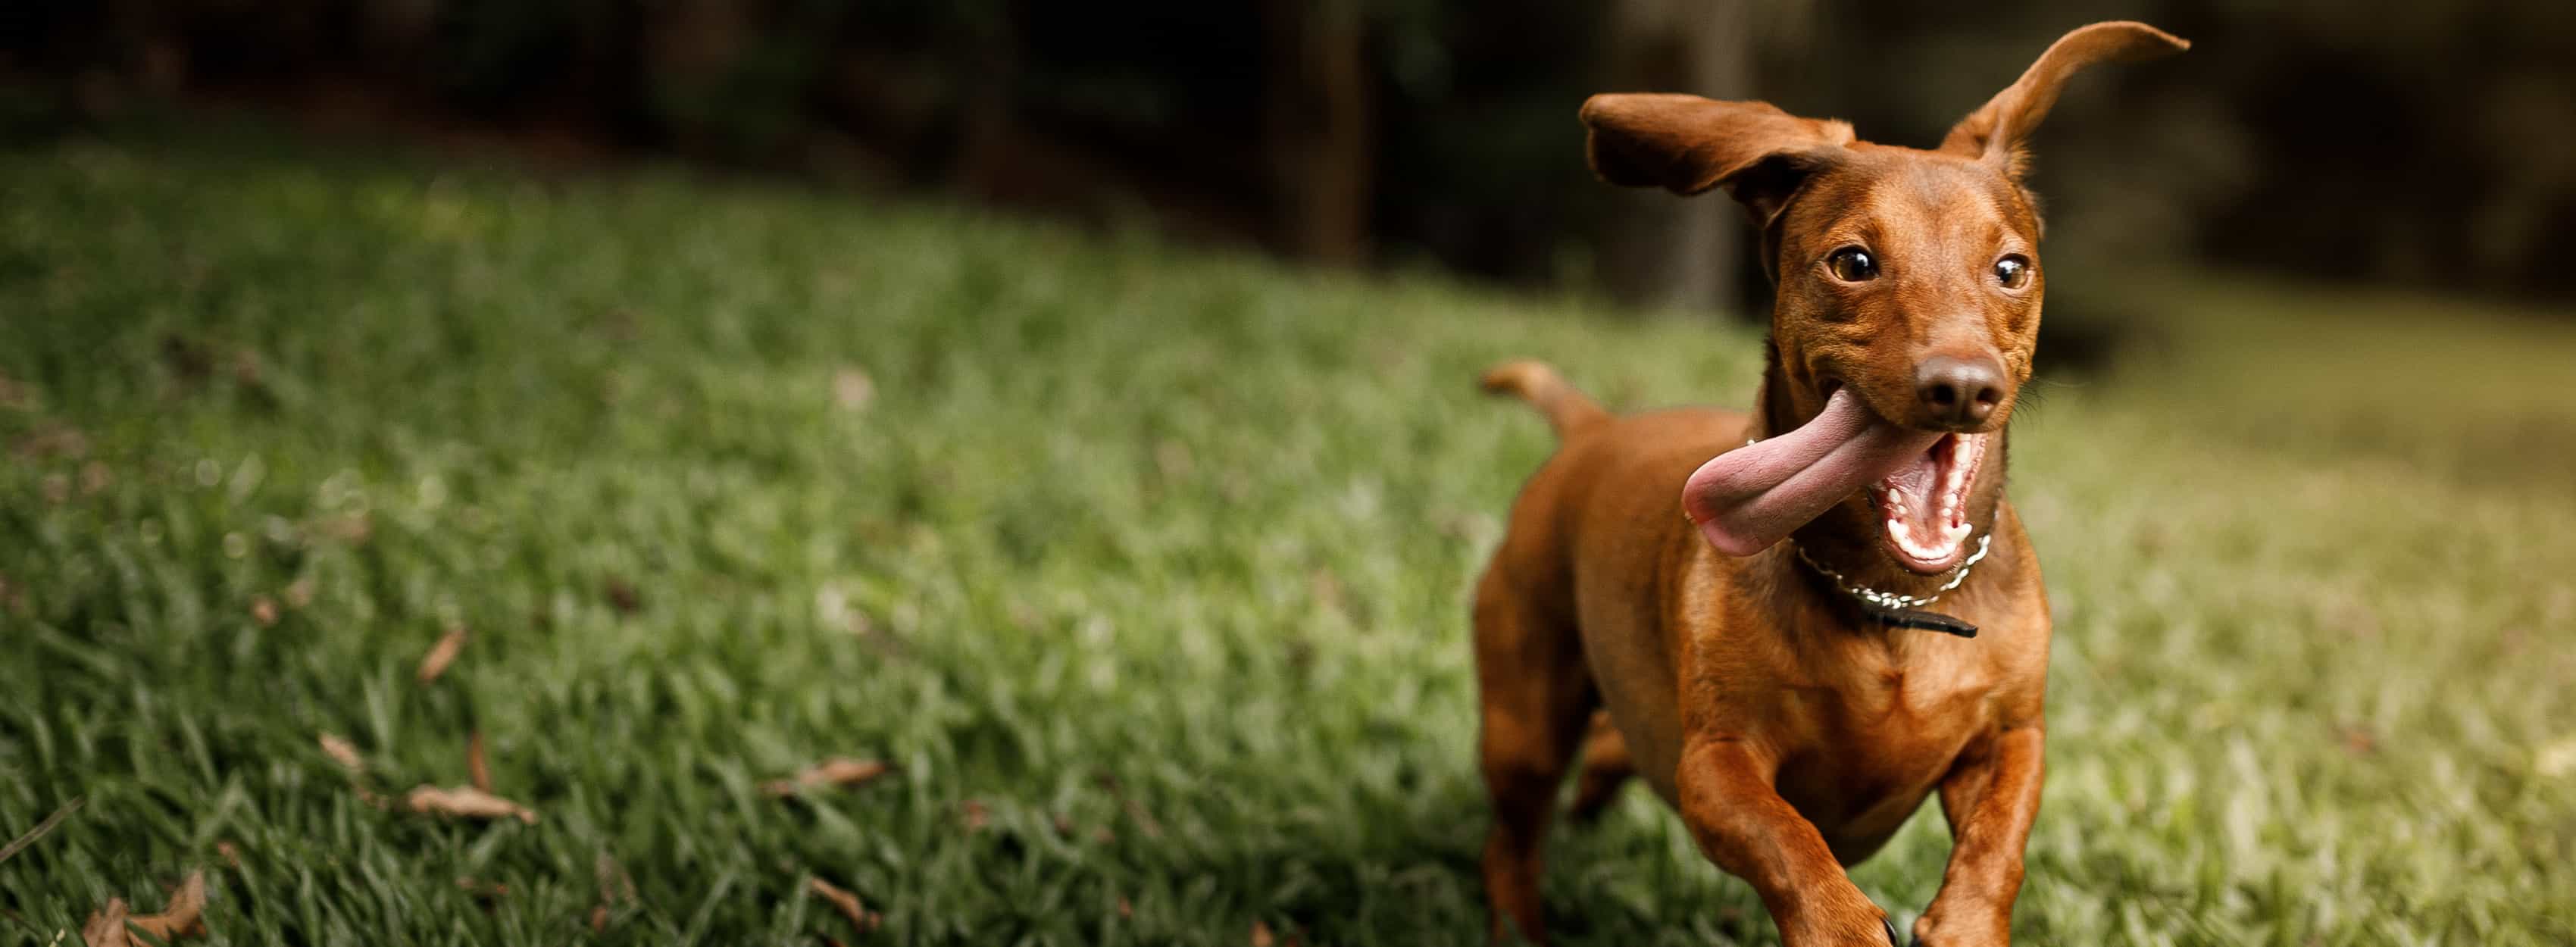 A brown dachshund running with his tongue out.